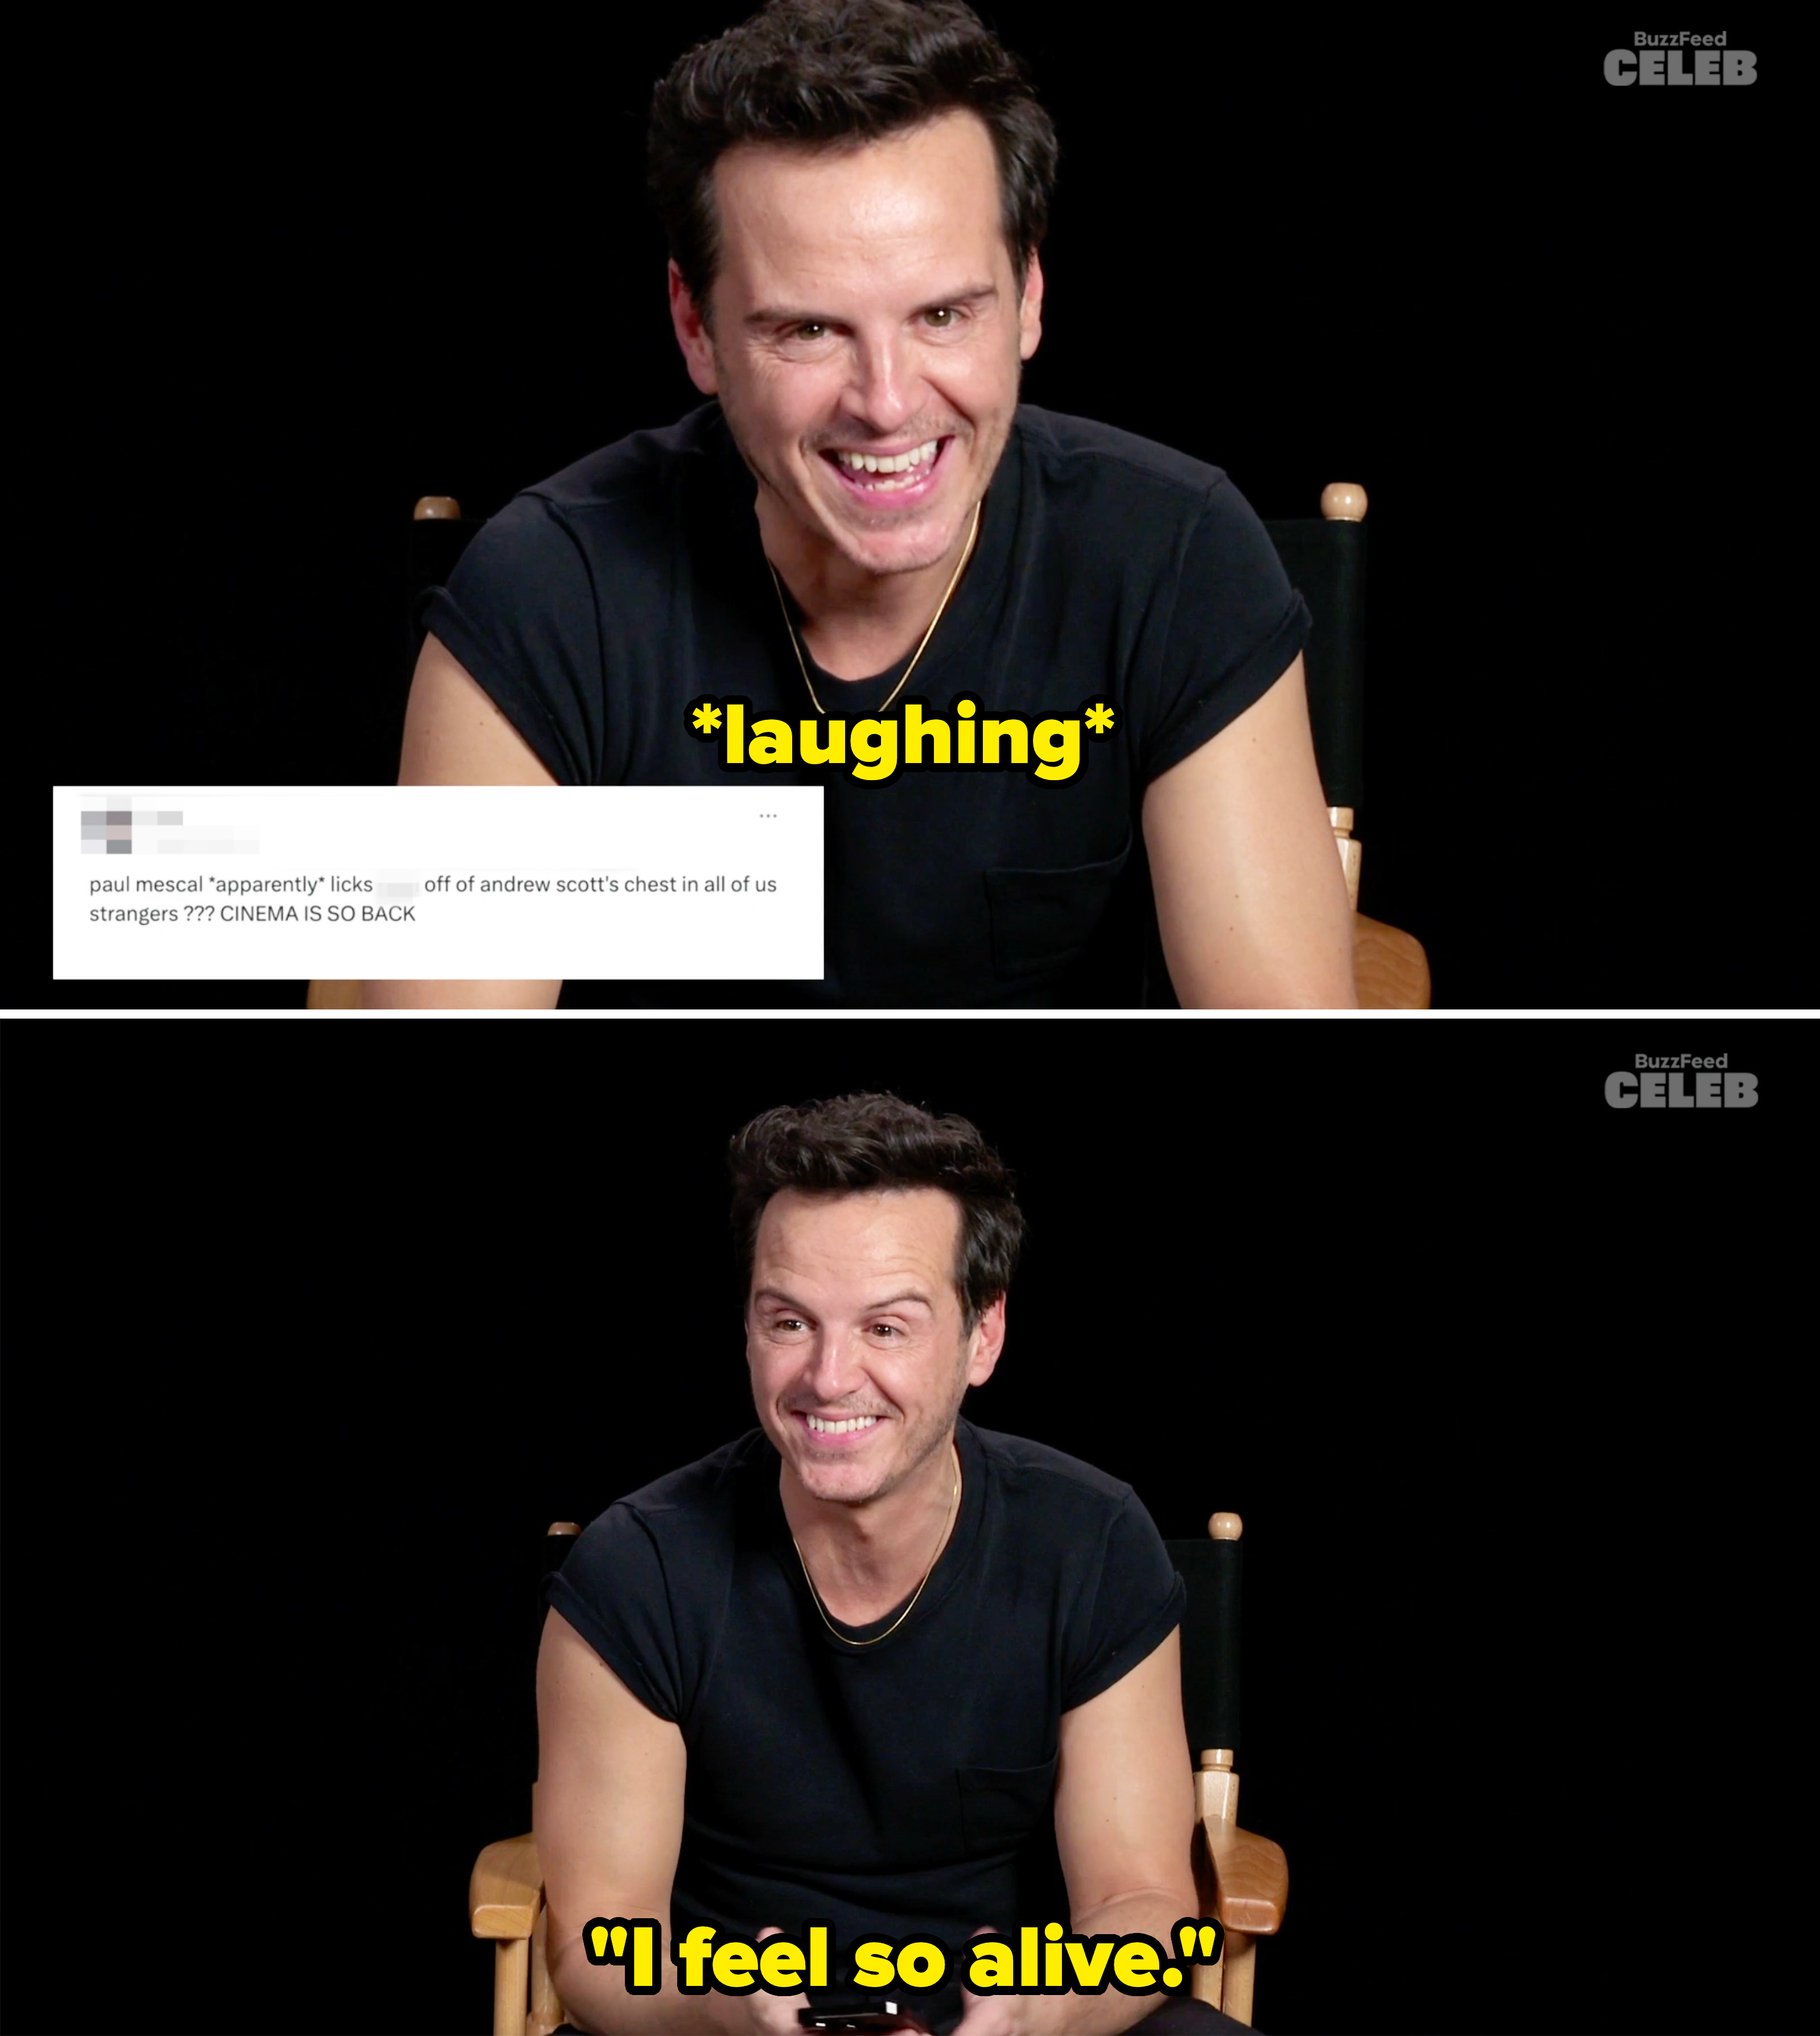 Andrew Scott, seated, reacts with a smile in front of a dark background. Text overlay from a tweet included